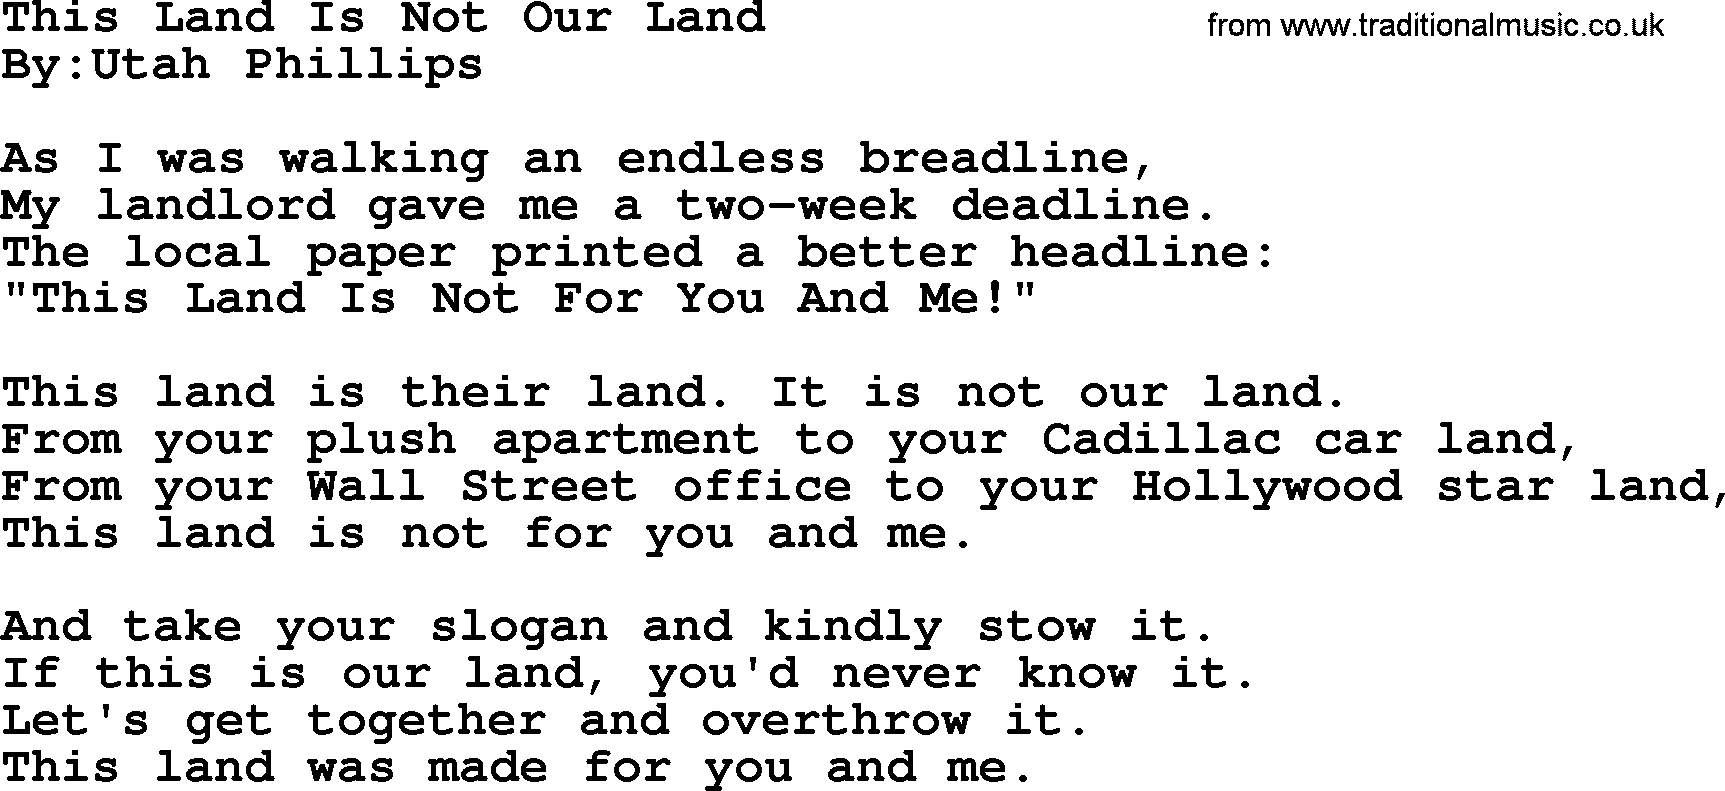 Political, Solidarity, Workers or Union song: This Land Is Not Our Land, lyrics